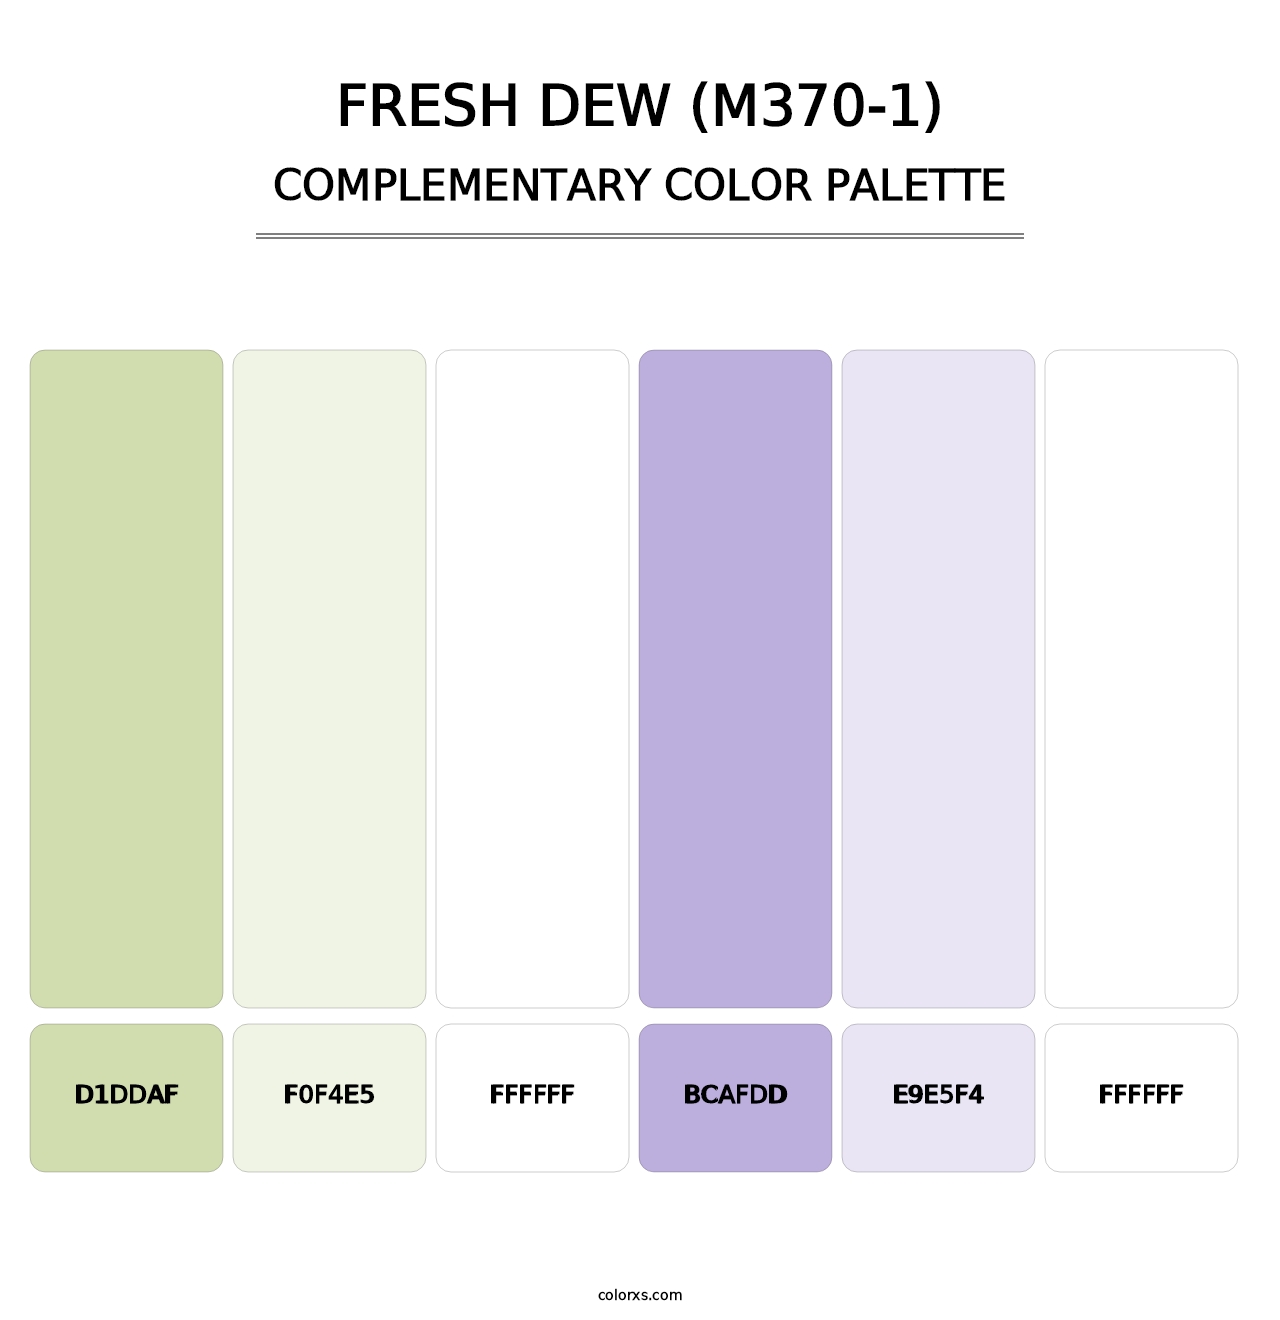 Fresh Dew (M370-1) - Complementary Color Palette